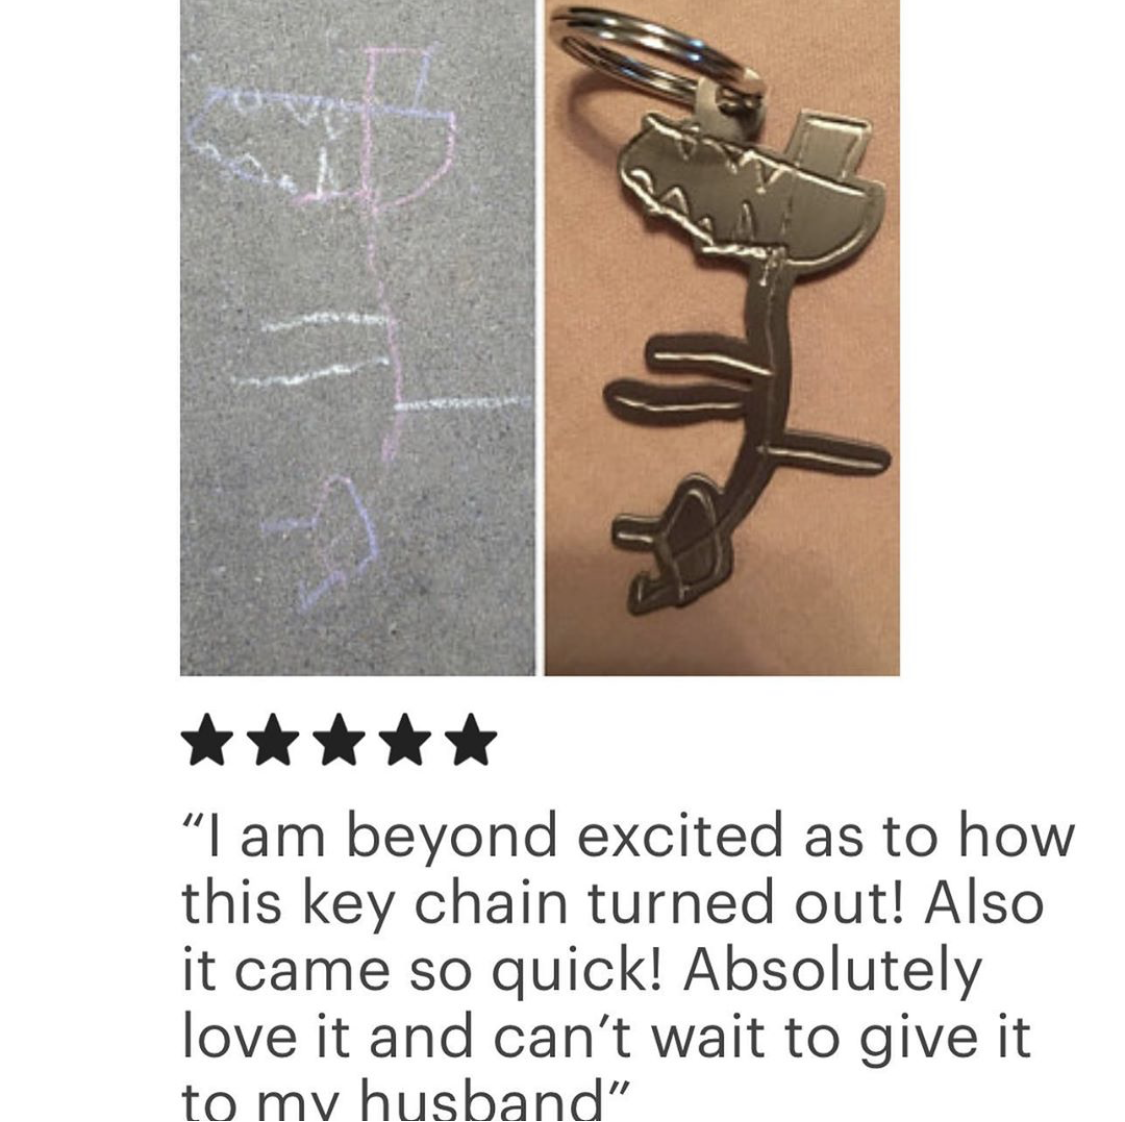 Customer excited and happy over the keychain gift ordered on Etsy